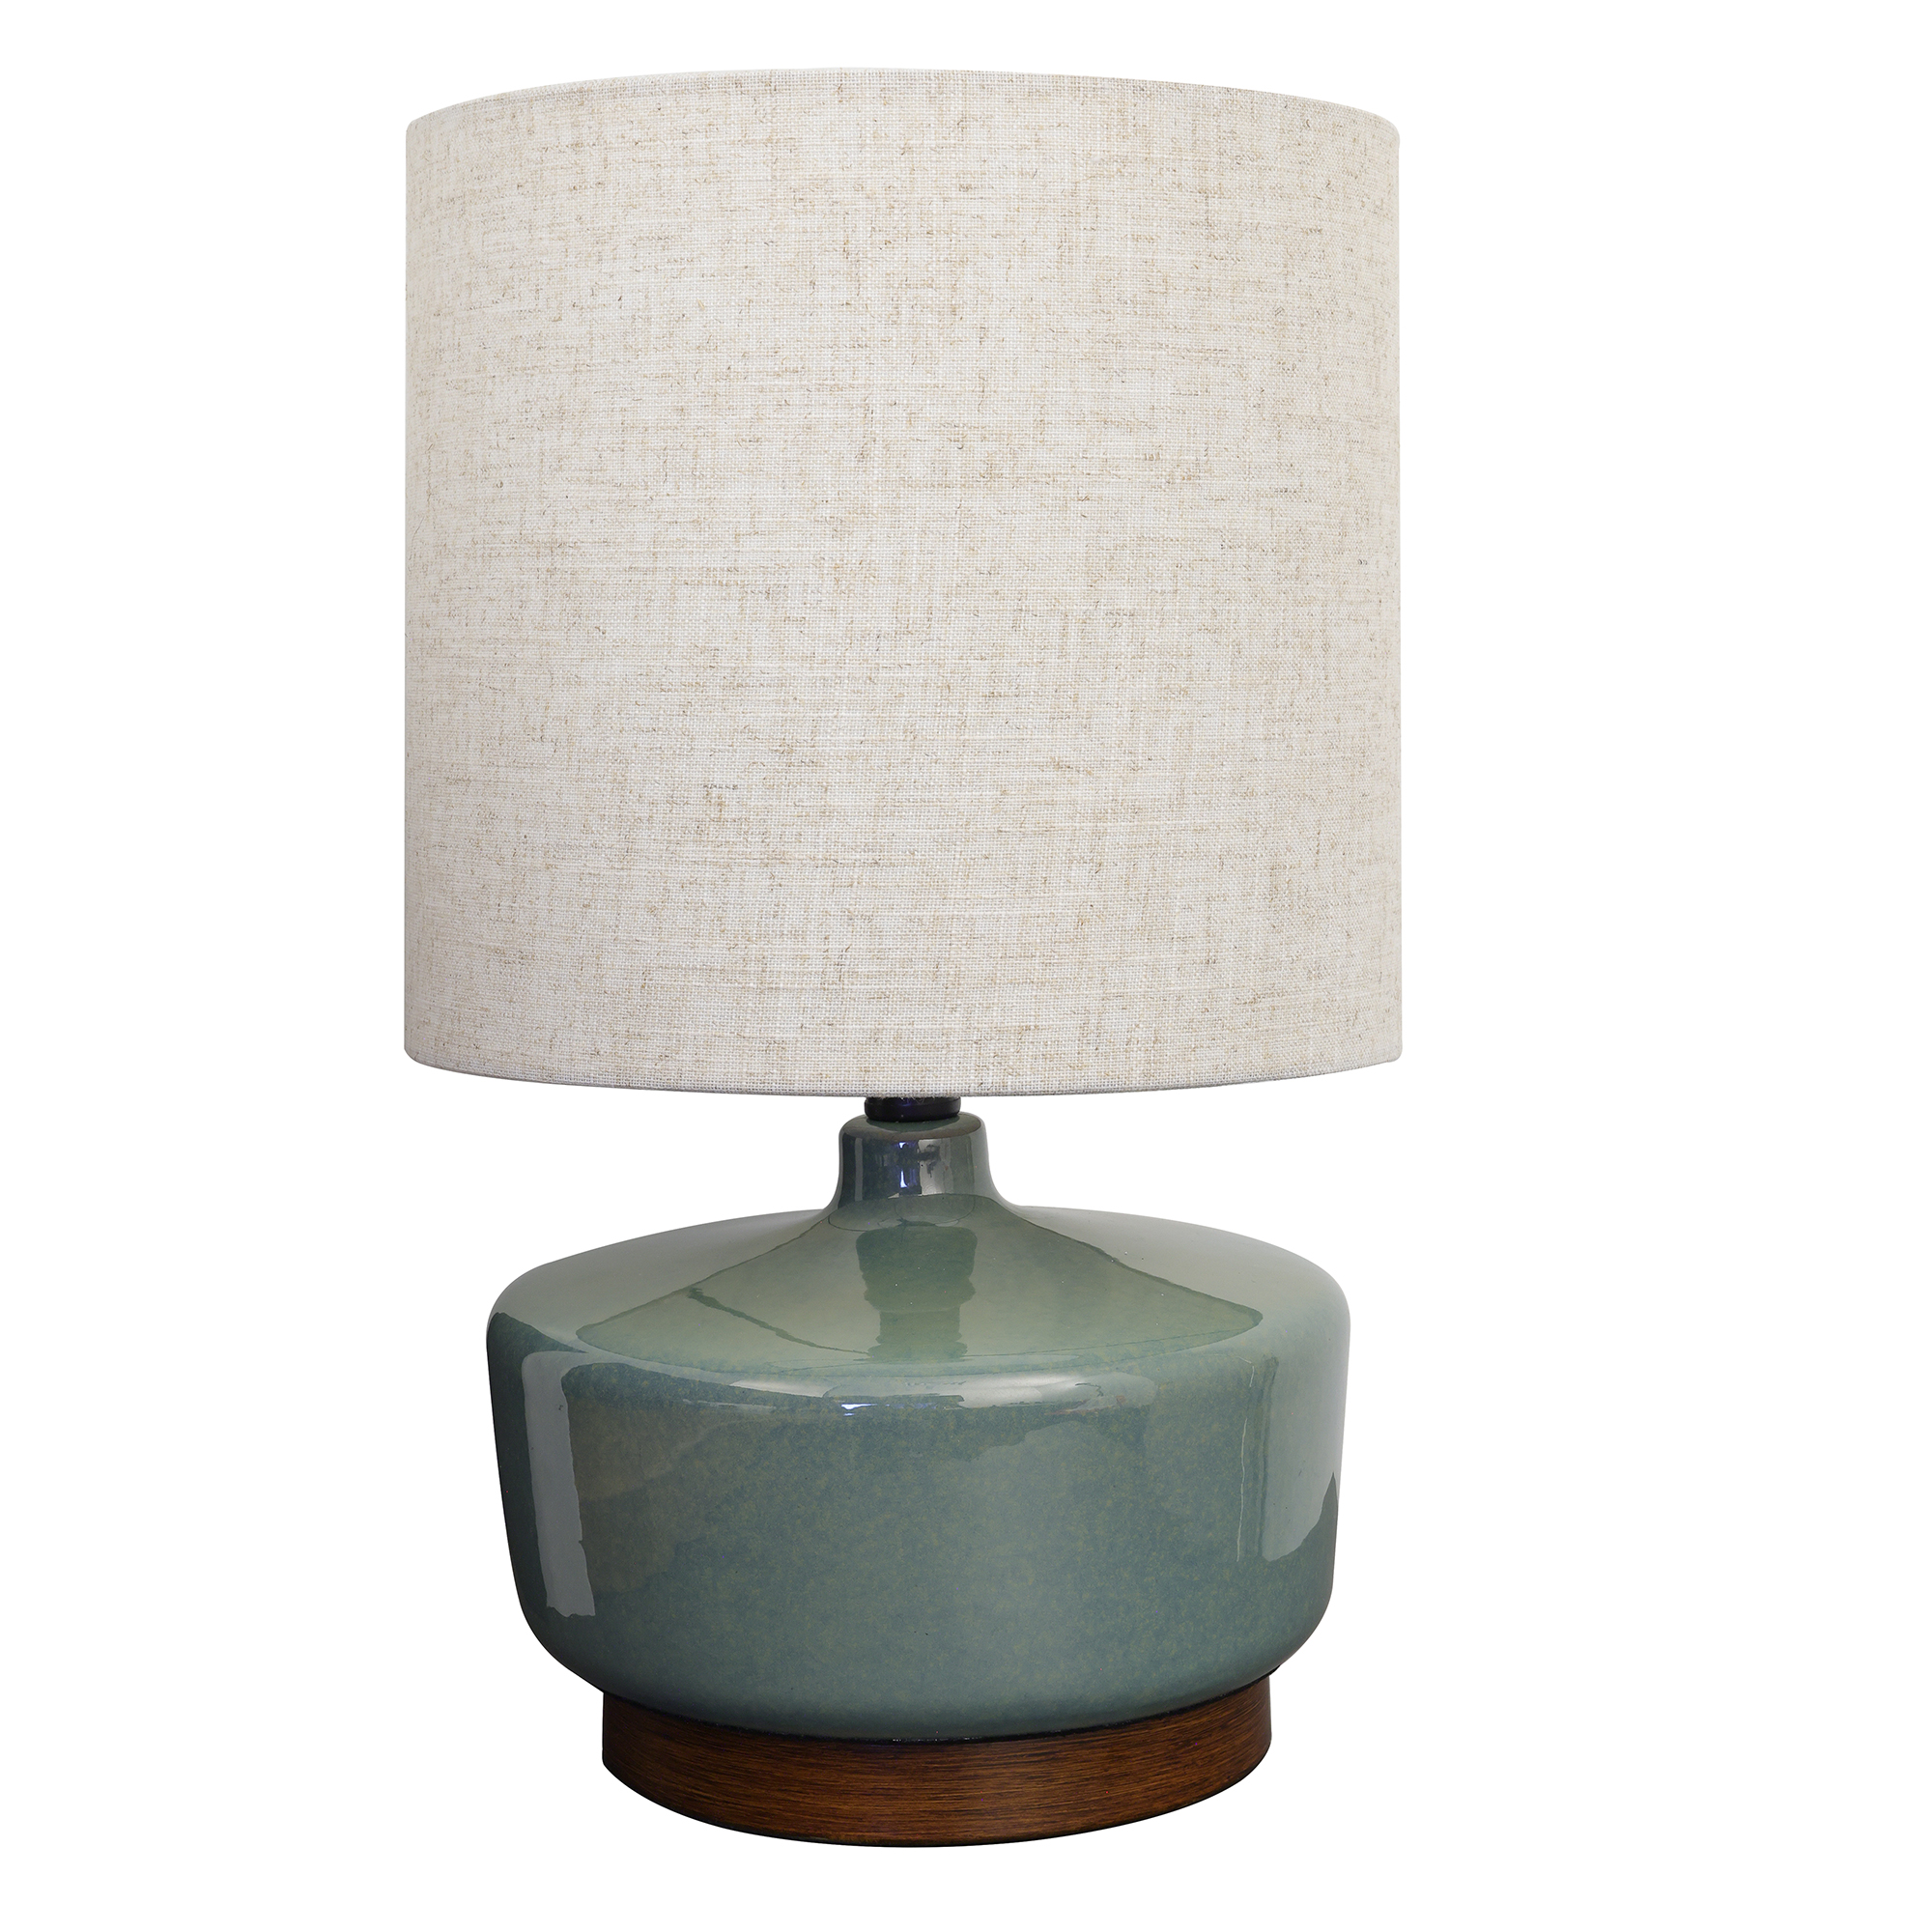 Better Homes & Gardens 17" Tall Modern Mid-Century Ceramic Table Lamp with Wood Base - image 1 of 9